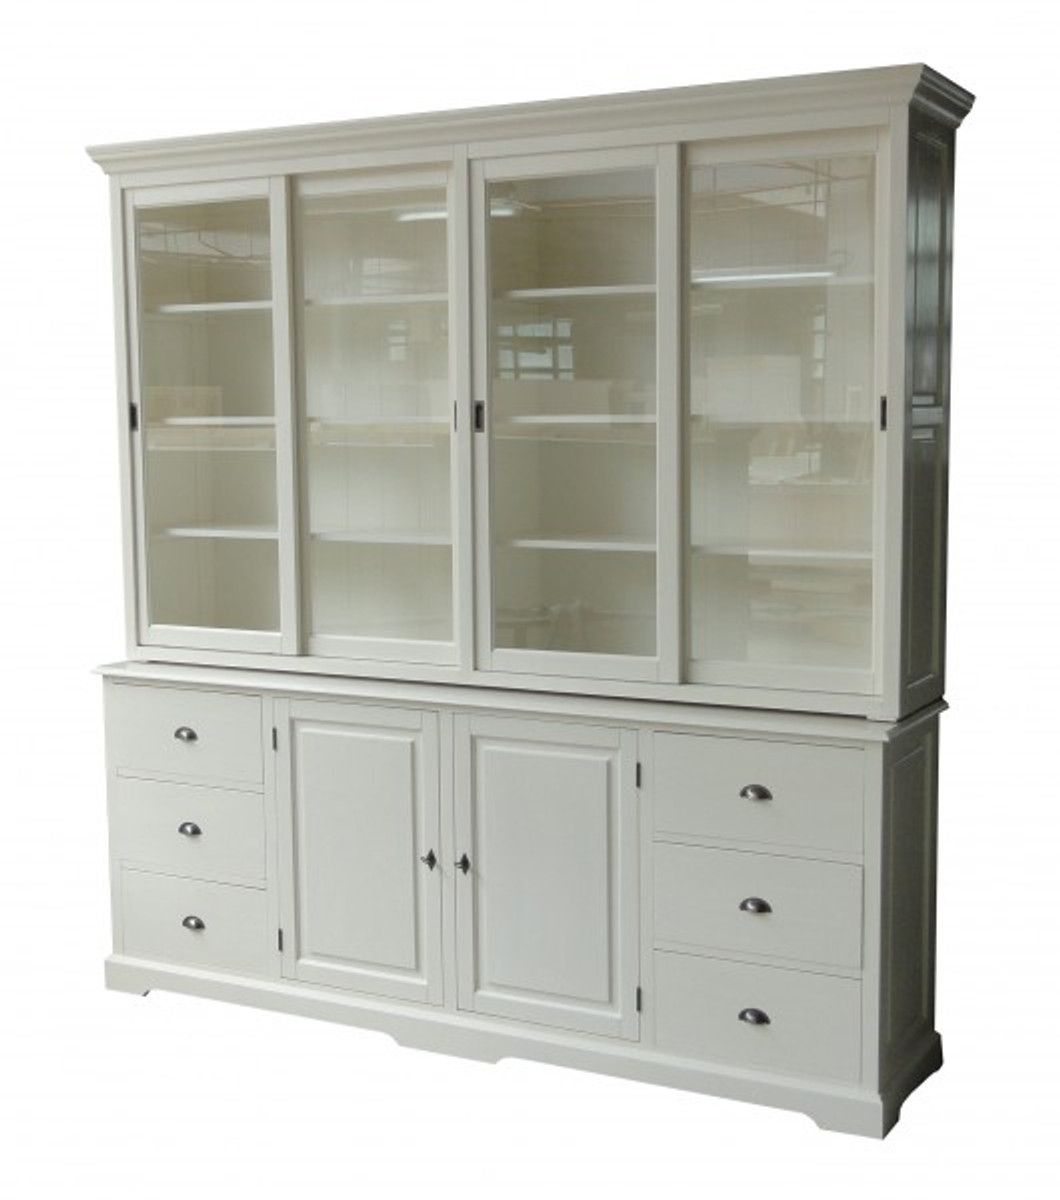 Casa Padrino Big Shabby Chic Cottage Style Wardrobe With 4 Doors And 6  Drawers – Buffet Cabinet – Cabinet Room | Casa Padrino With Large Shabby Chic Wardrobes (View 5 of 15)